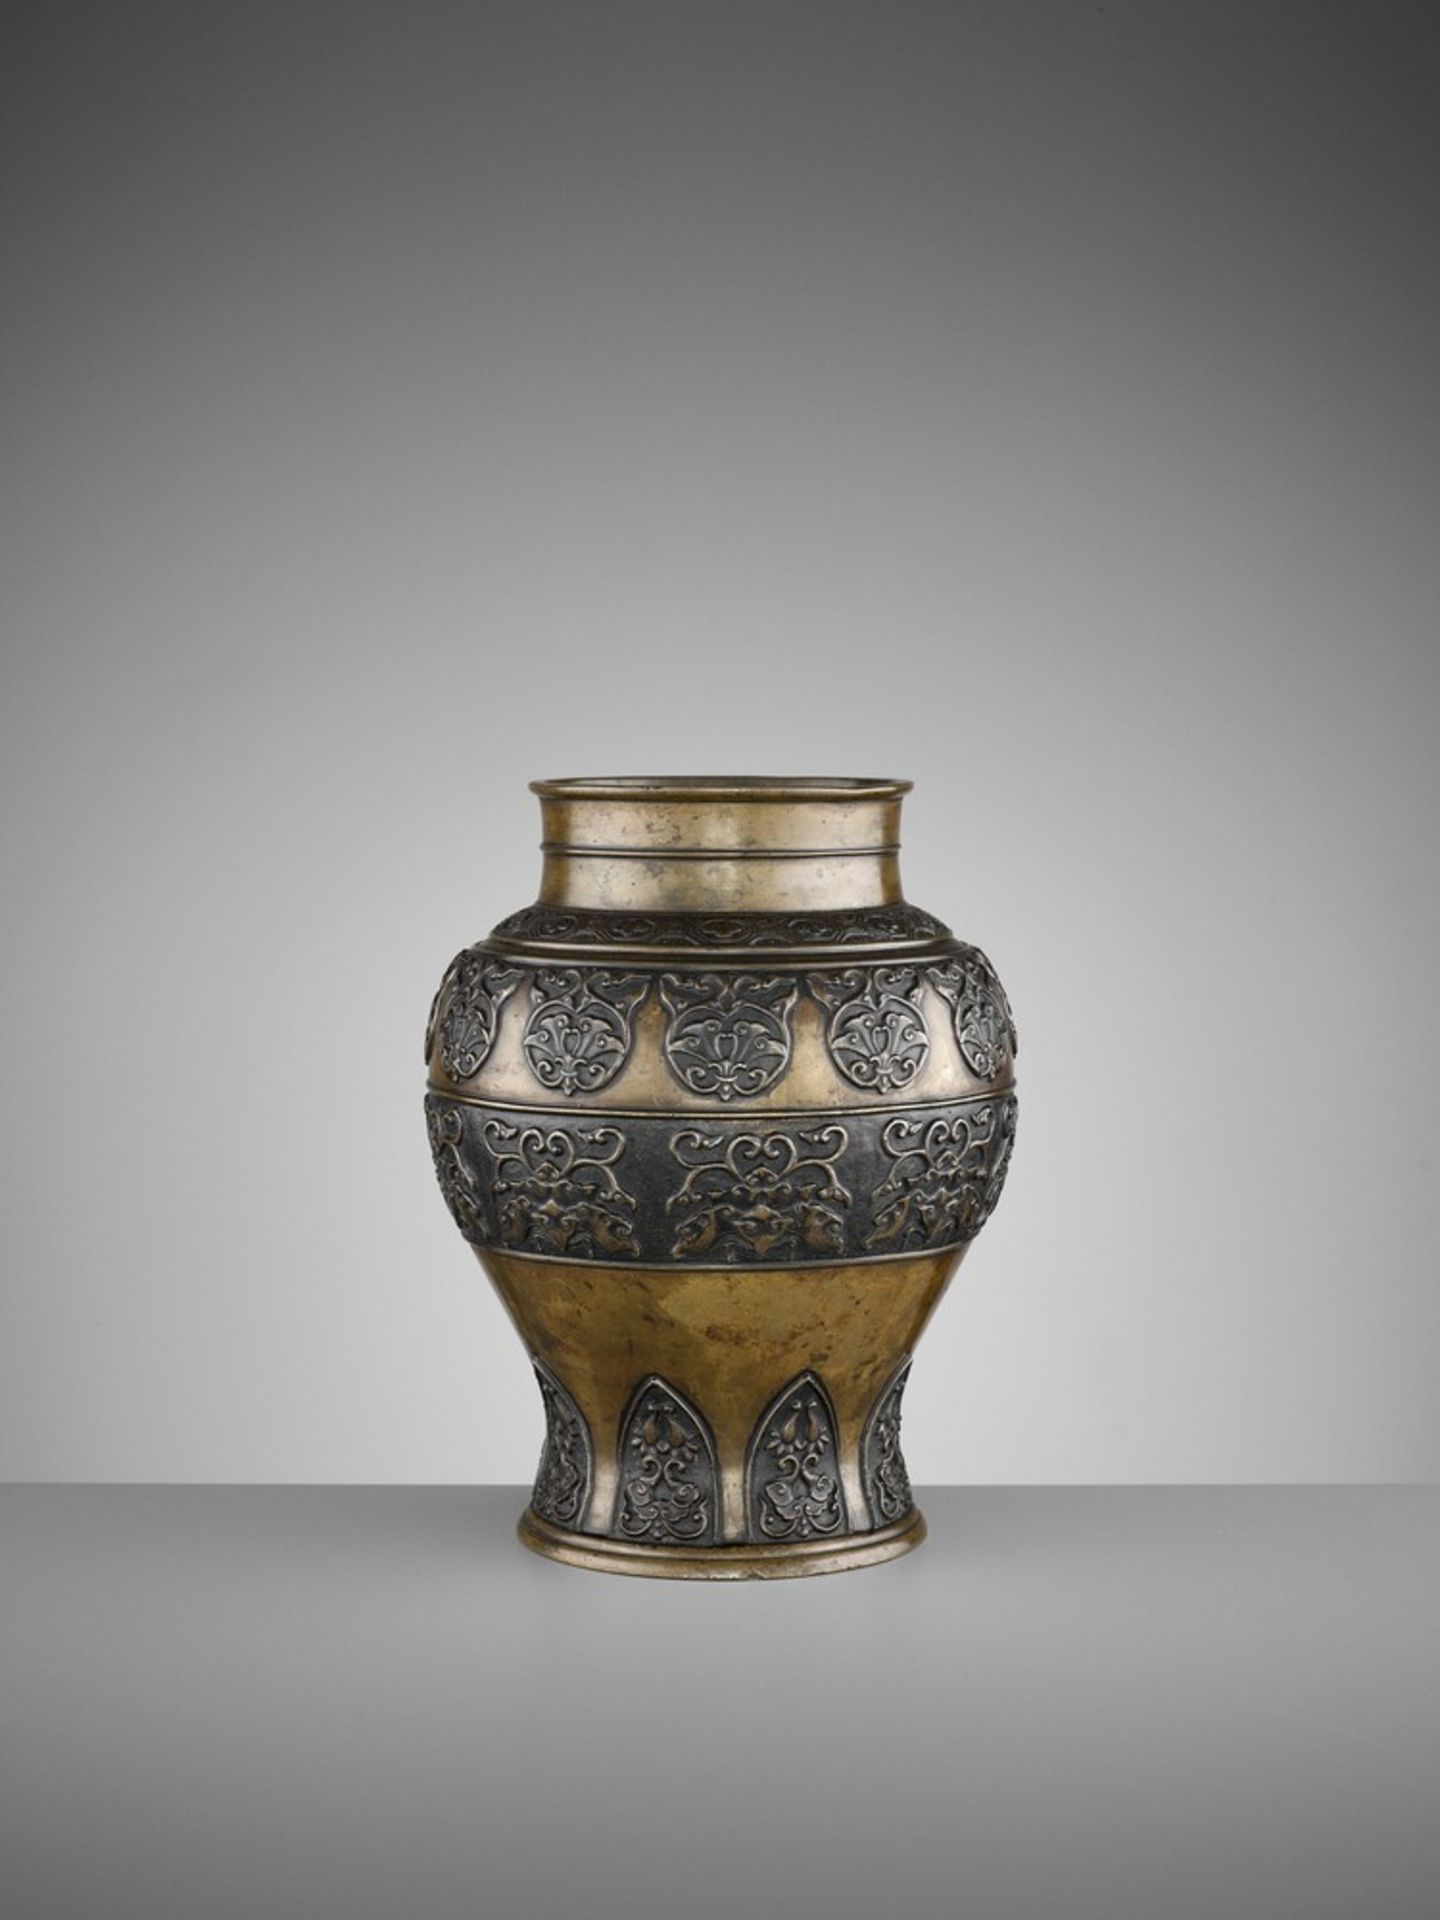 AN ARCHAISTIC BRONZE BALUSTER VASE, 17TH CENTURY - Image 4 of 8